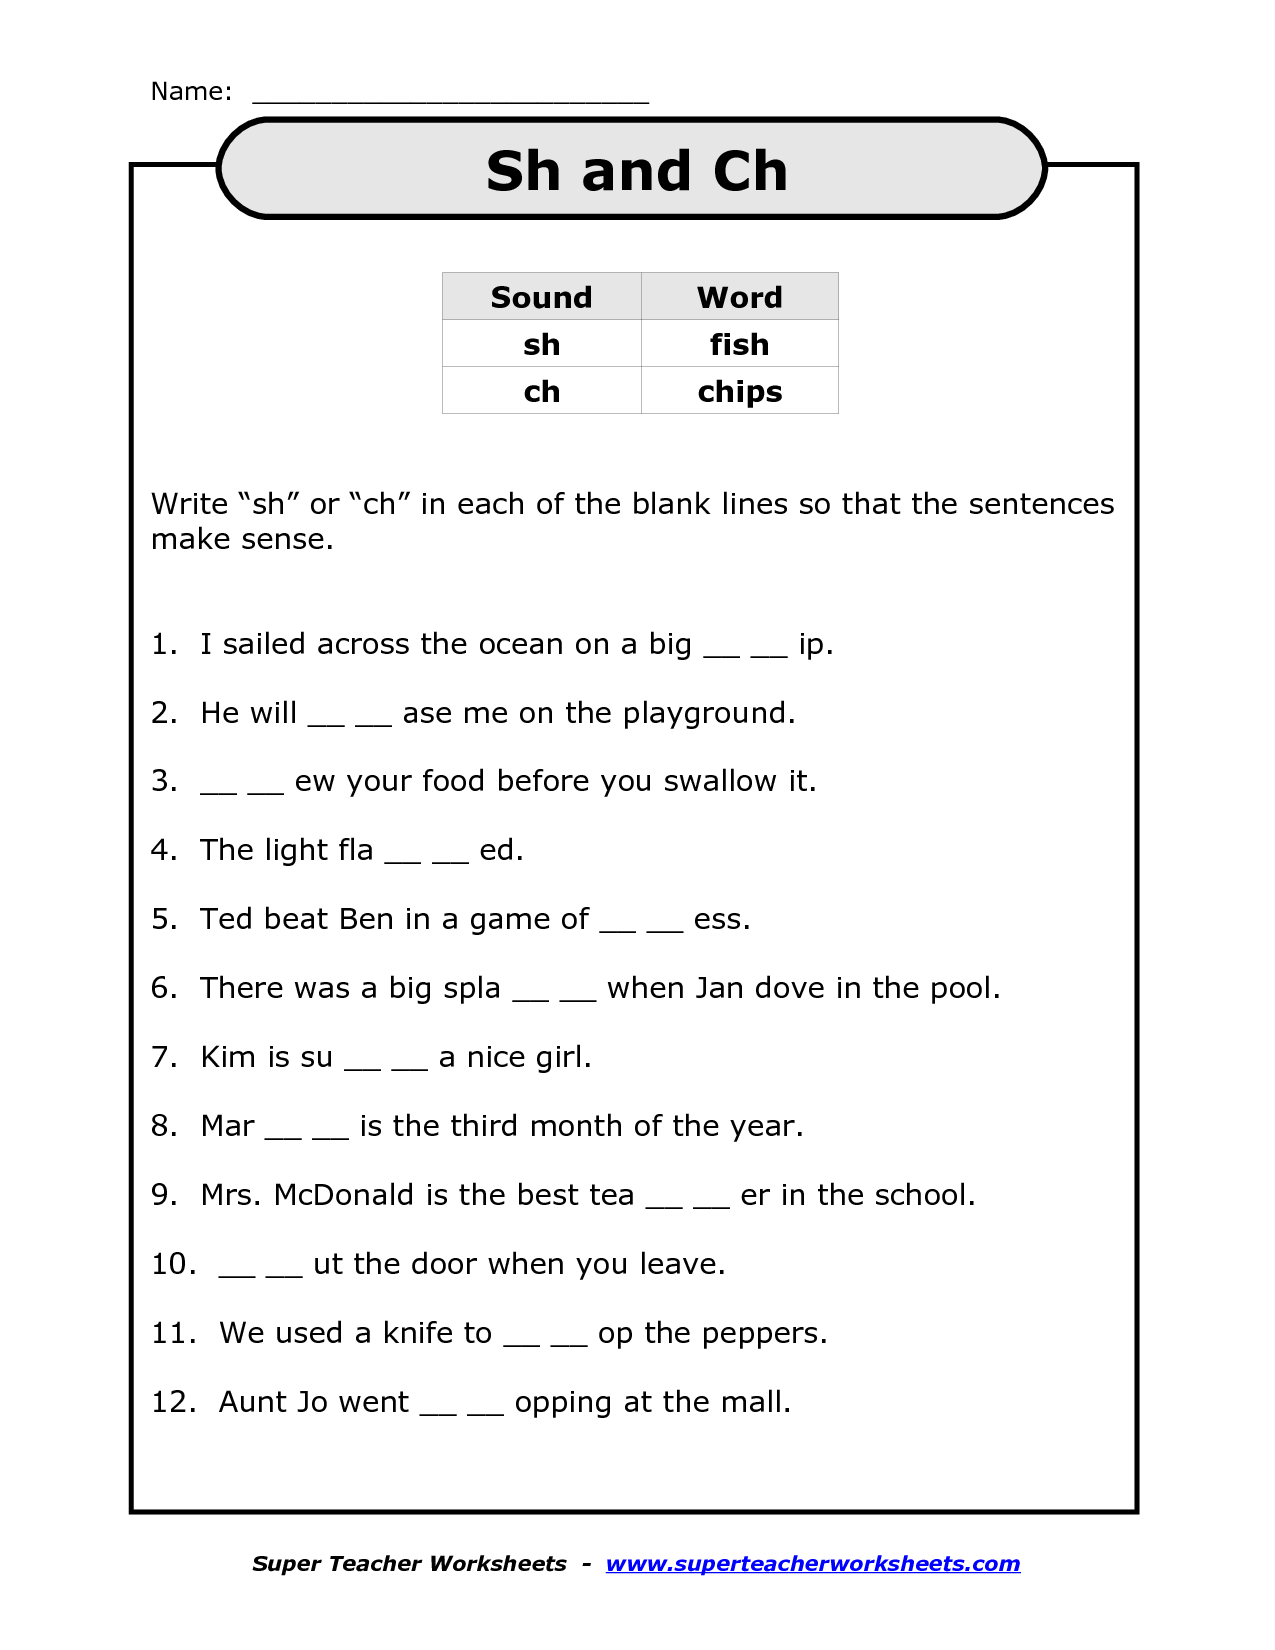 10-best-images-of-consonant-digraph-worksheet-for-kindergarten-digraph-sh-ch-th-wh-ph